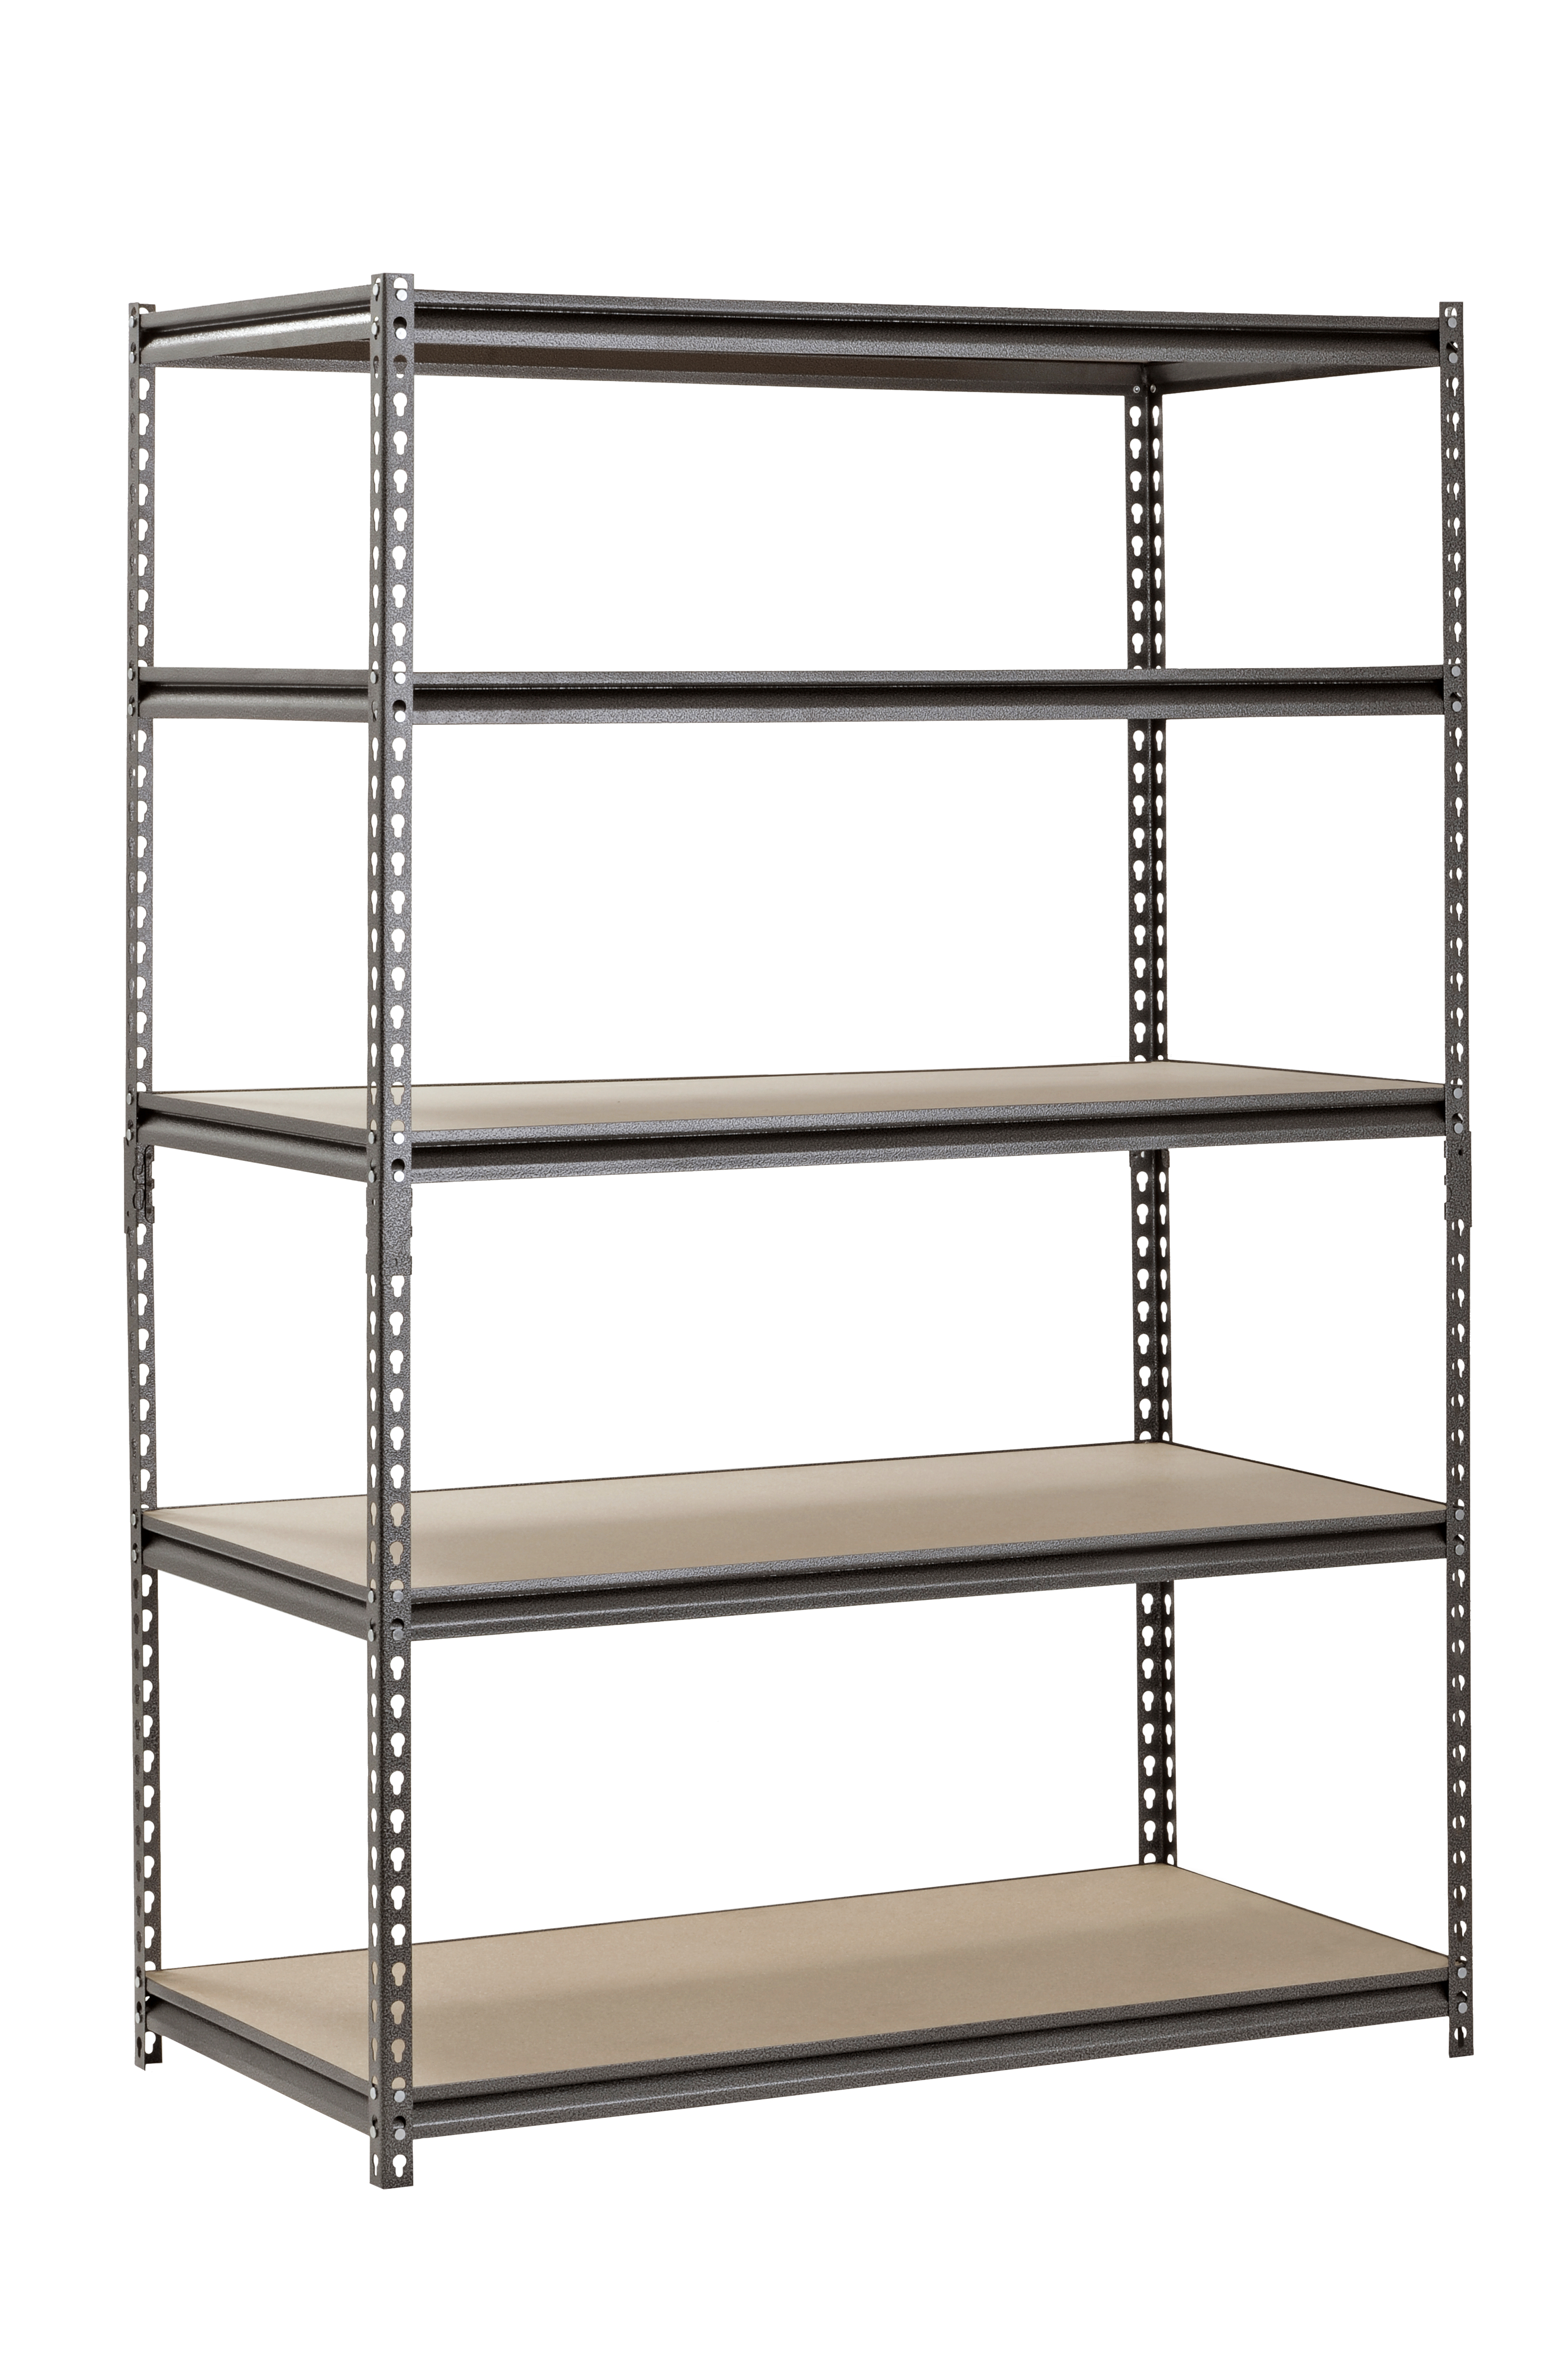 Muscle Rack 48"W x 24"D x 72"H 5-Tier Steel Shelving; 4,000 lb. Total Capacity; Silver - image 1 of 7